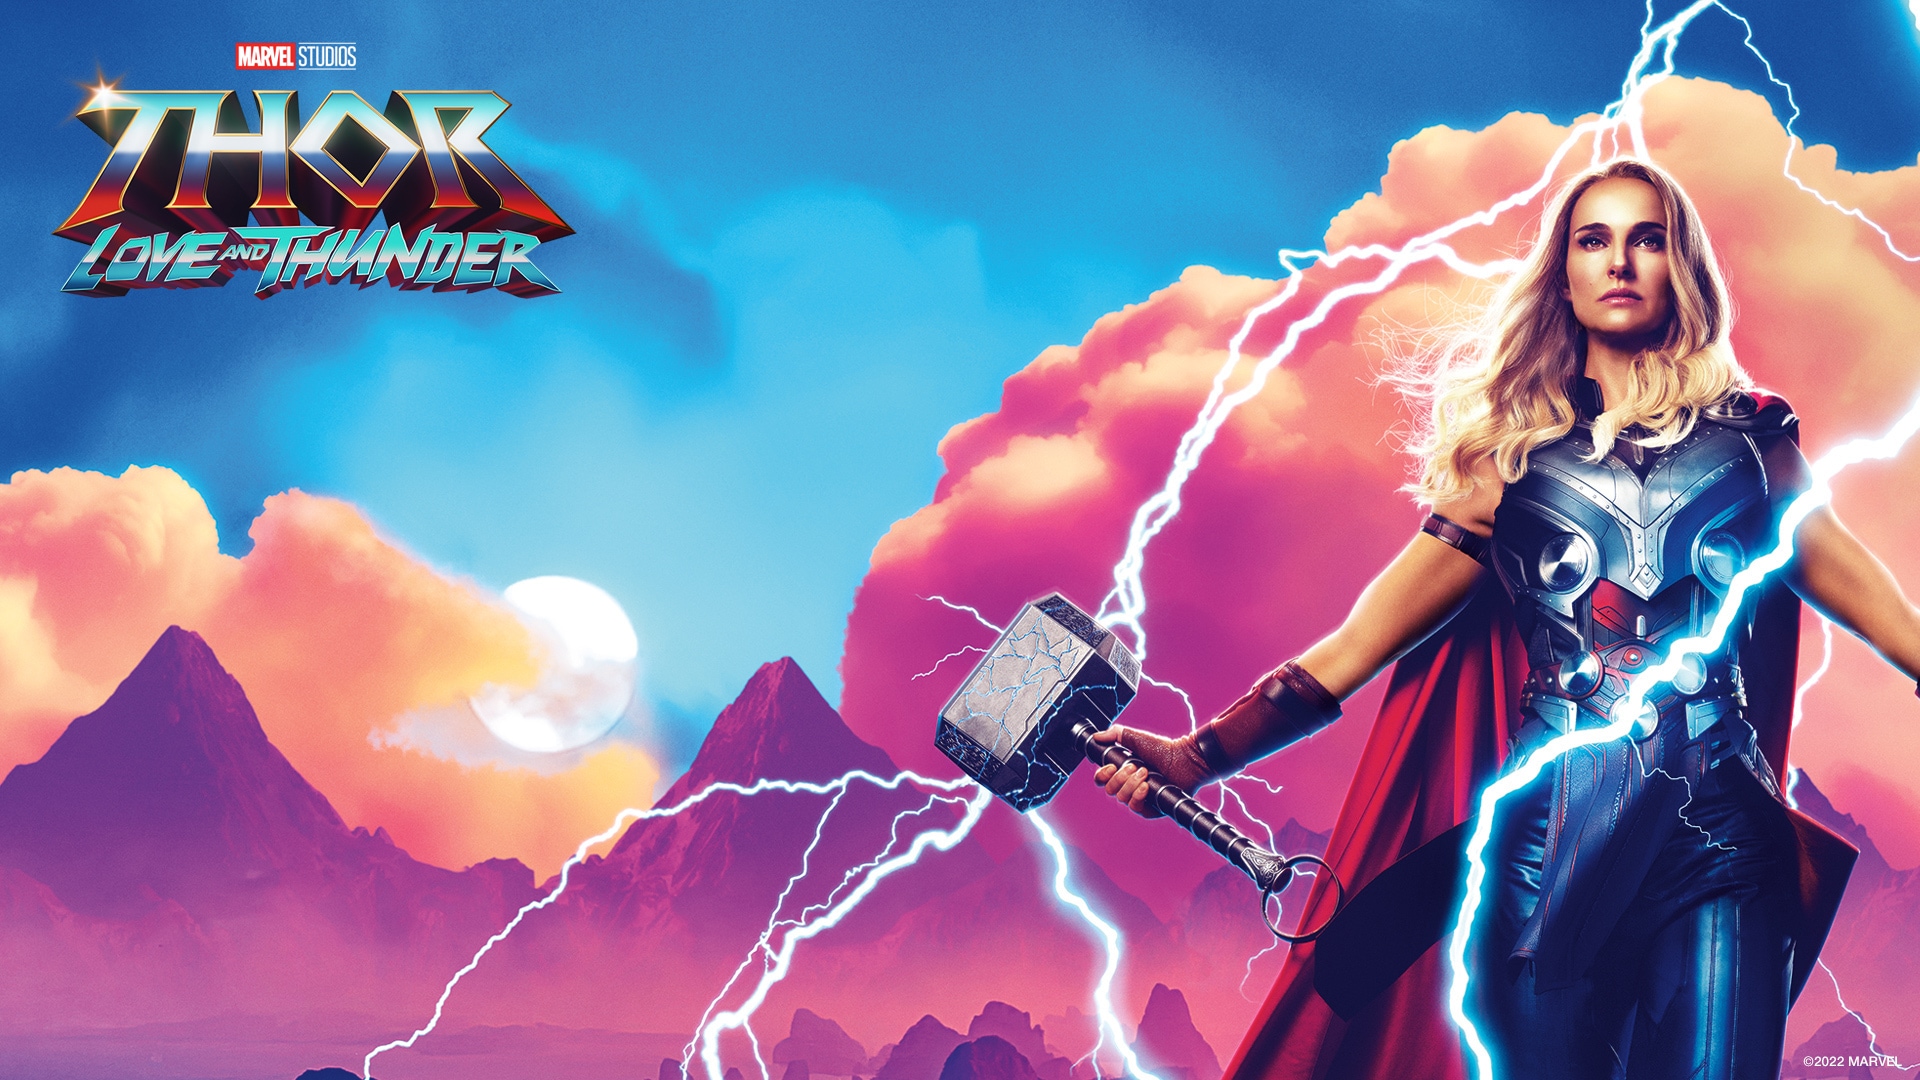 Prepare For The Arrival Of Marvel Studios' Thor: Love And Thunder with These Electrifying Wallpaper For Your Mobile And Video Calls!